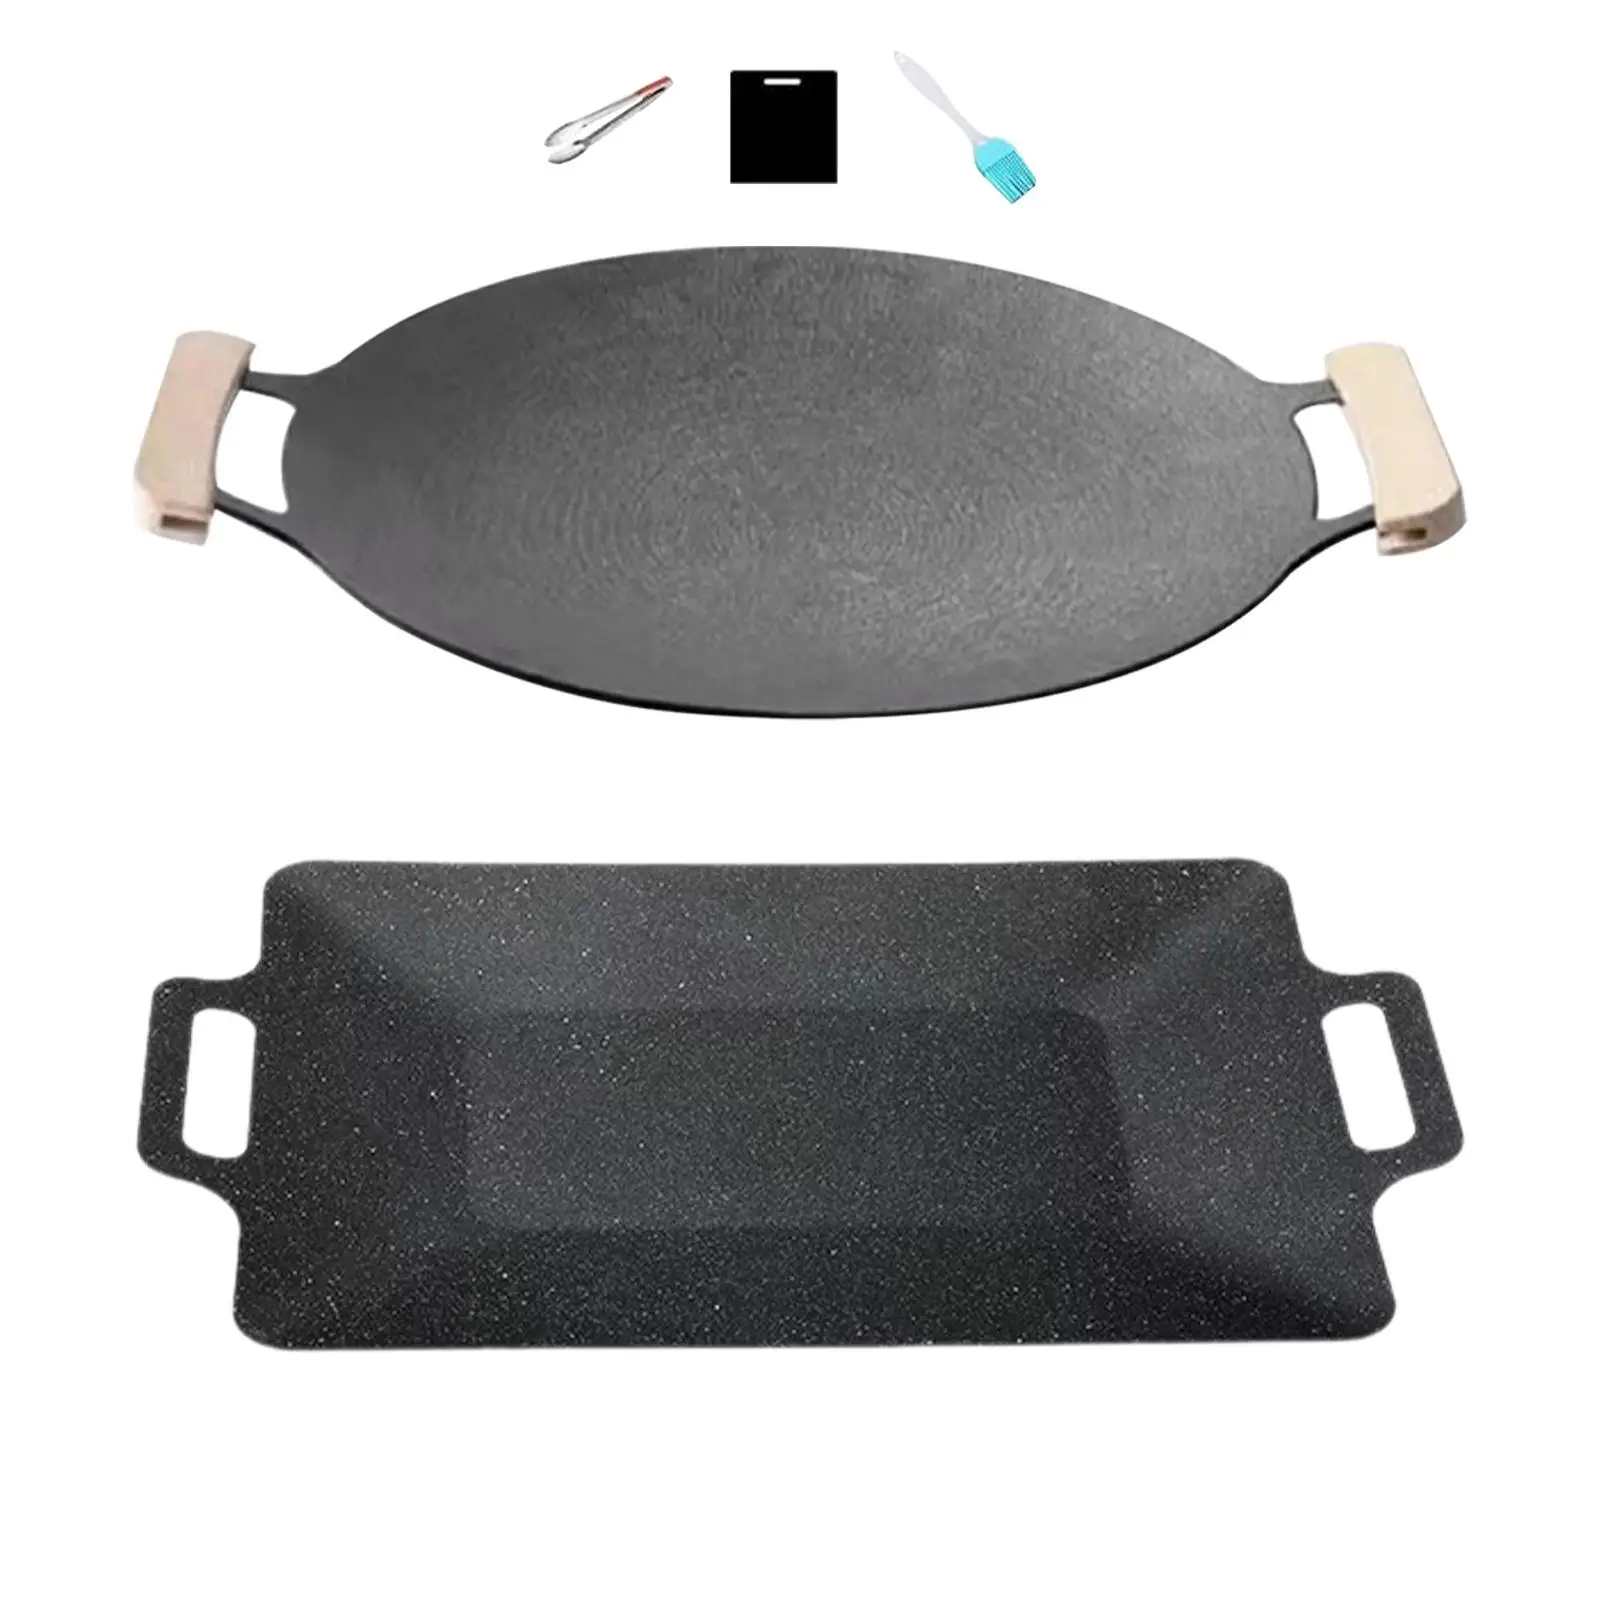 Korean BBQ Pan with Handles Cookware Roasting Cooking Outdoor Pan Barbecue Grill